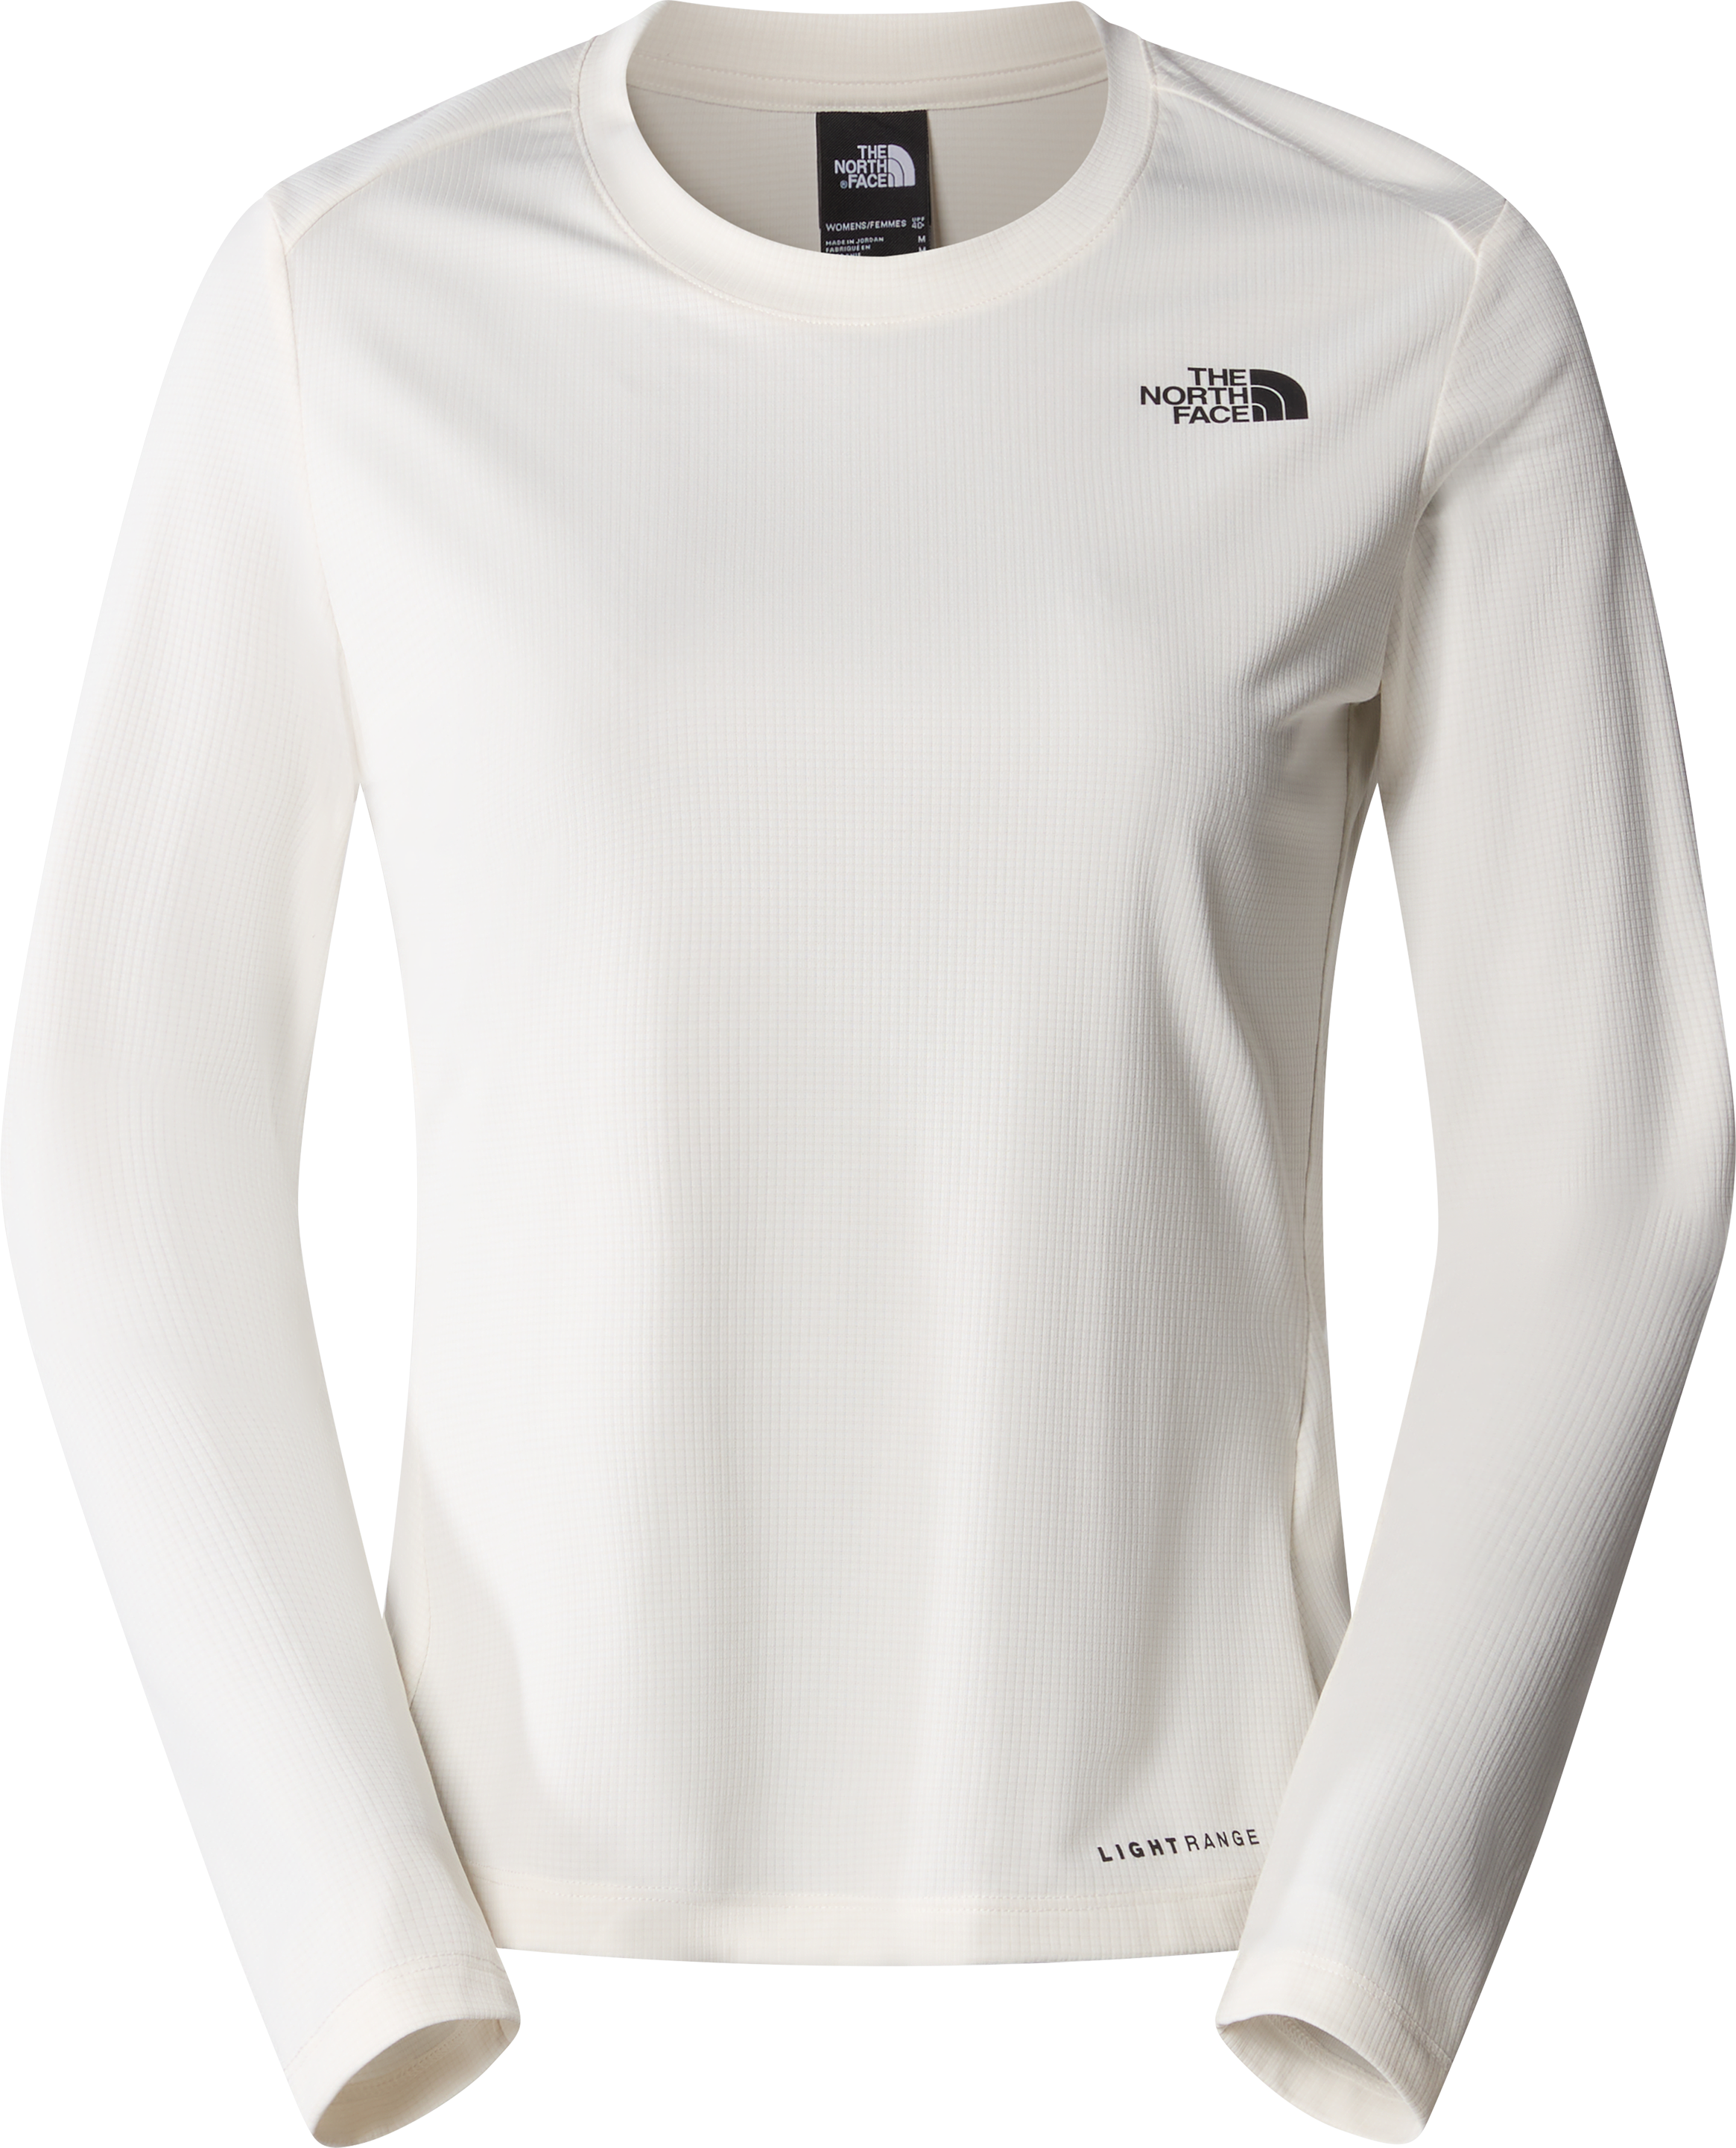 The North Face Women’s Shadow Long-Sleeve T-Shirt White Dune